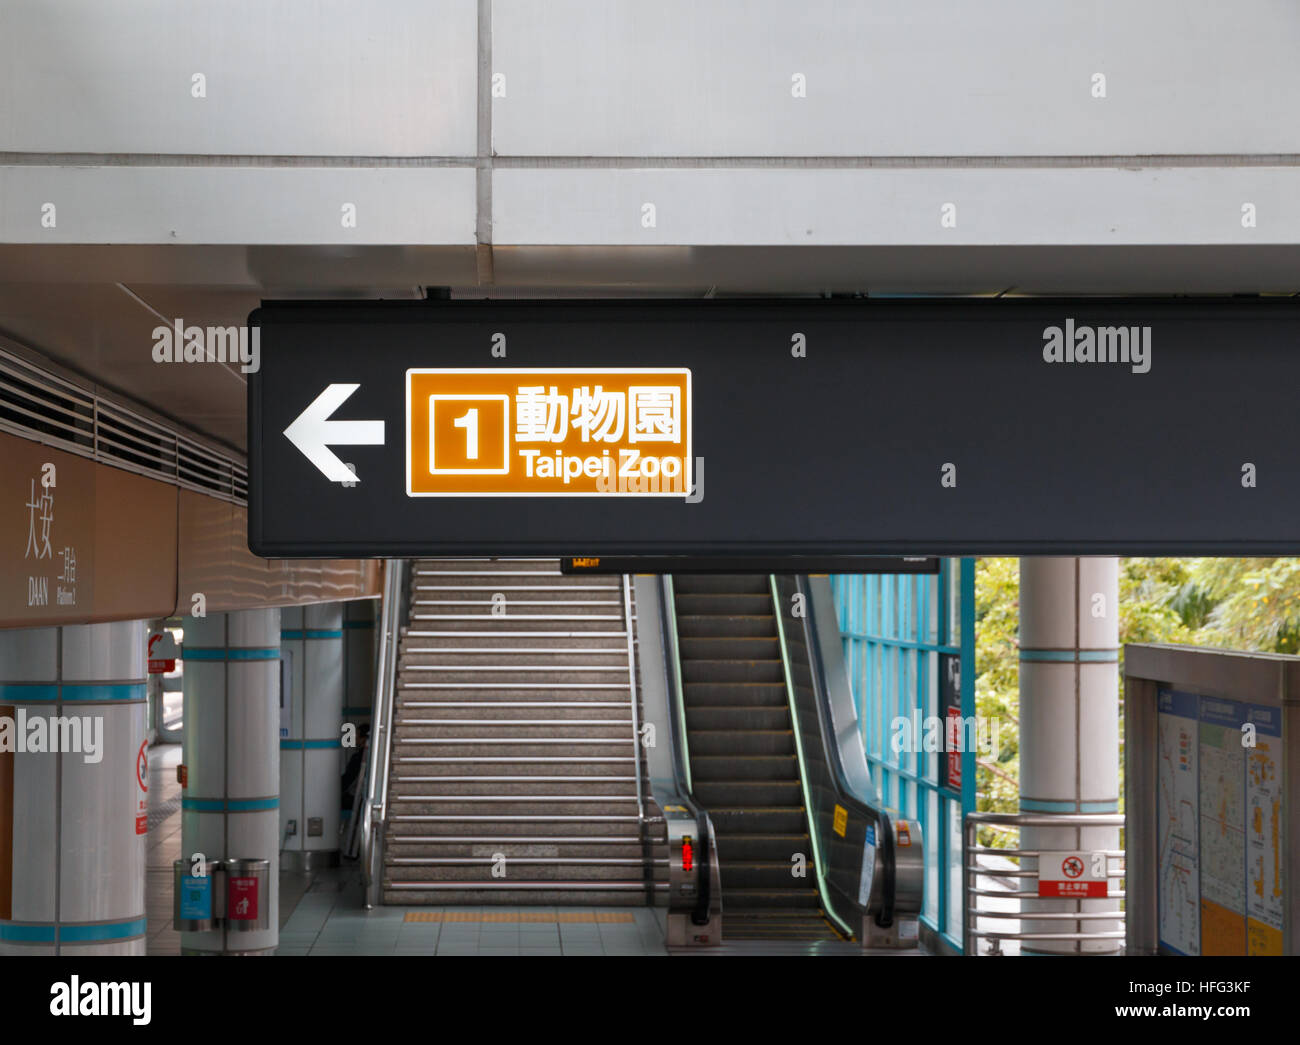 [Editorial Use Only] Illumination sign in a metro station directing to Line 1, with destination Taipei Zoo, in Taiwan Stock Photo